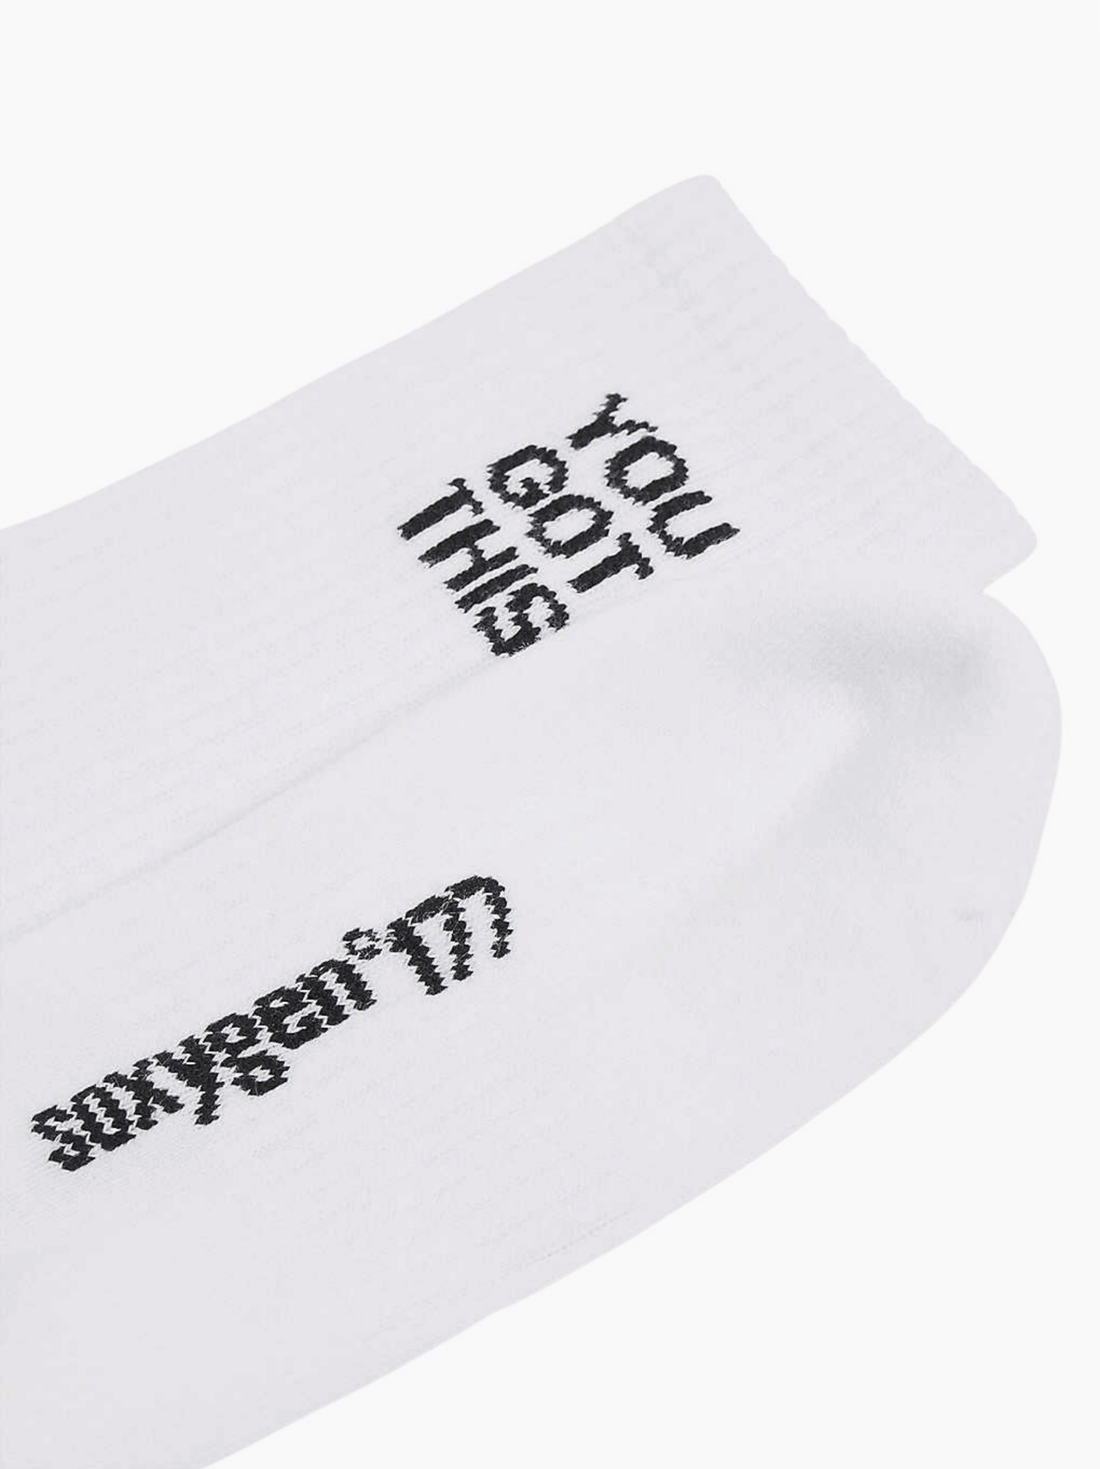 You Got This White Socks | The Go-To